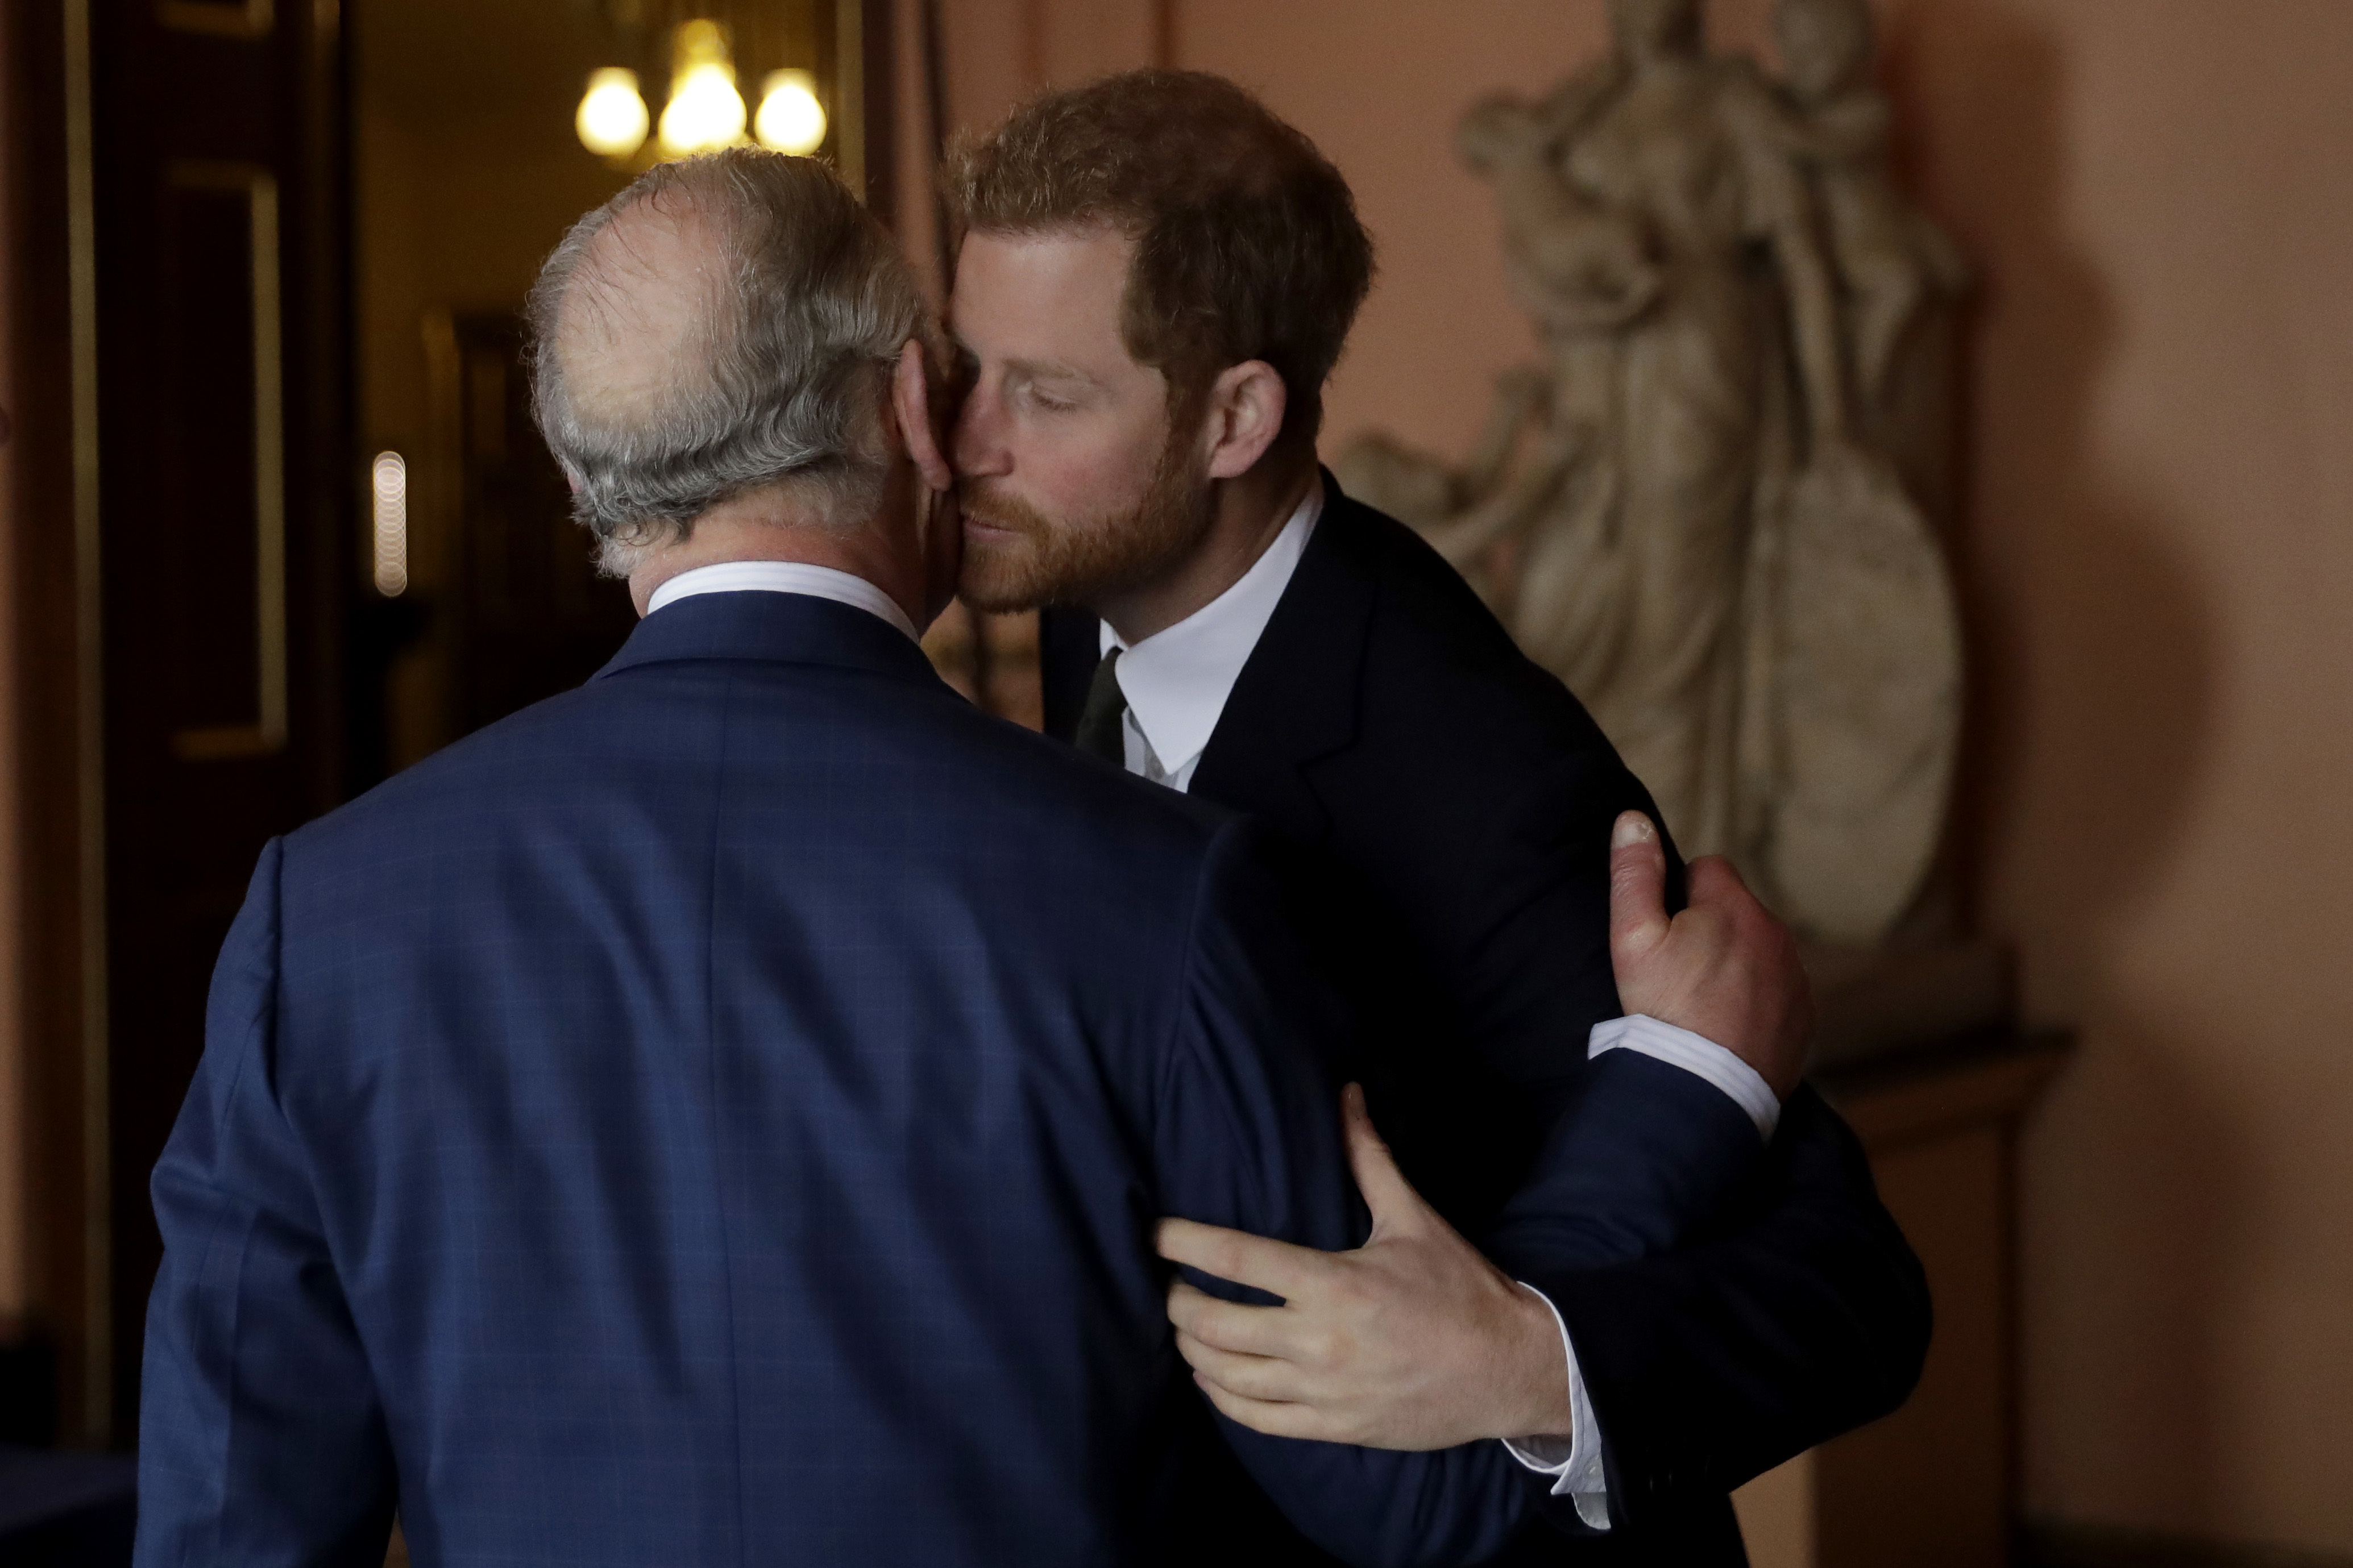 King Charles III and Prince Harry at the "International Year of The Reef" 2018 meeting in London, England on February 14, 2018 | Source: Getty Images